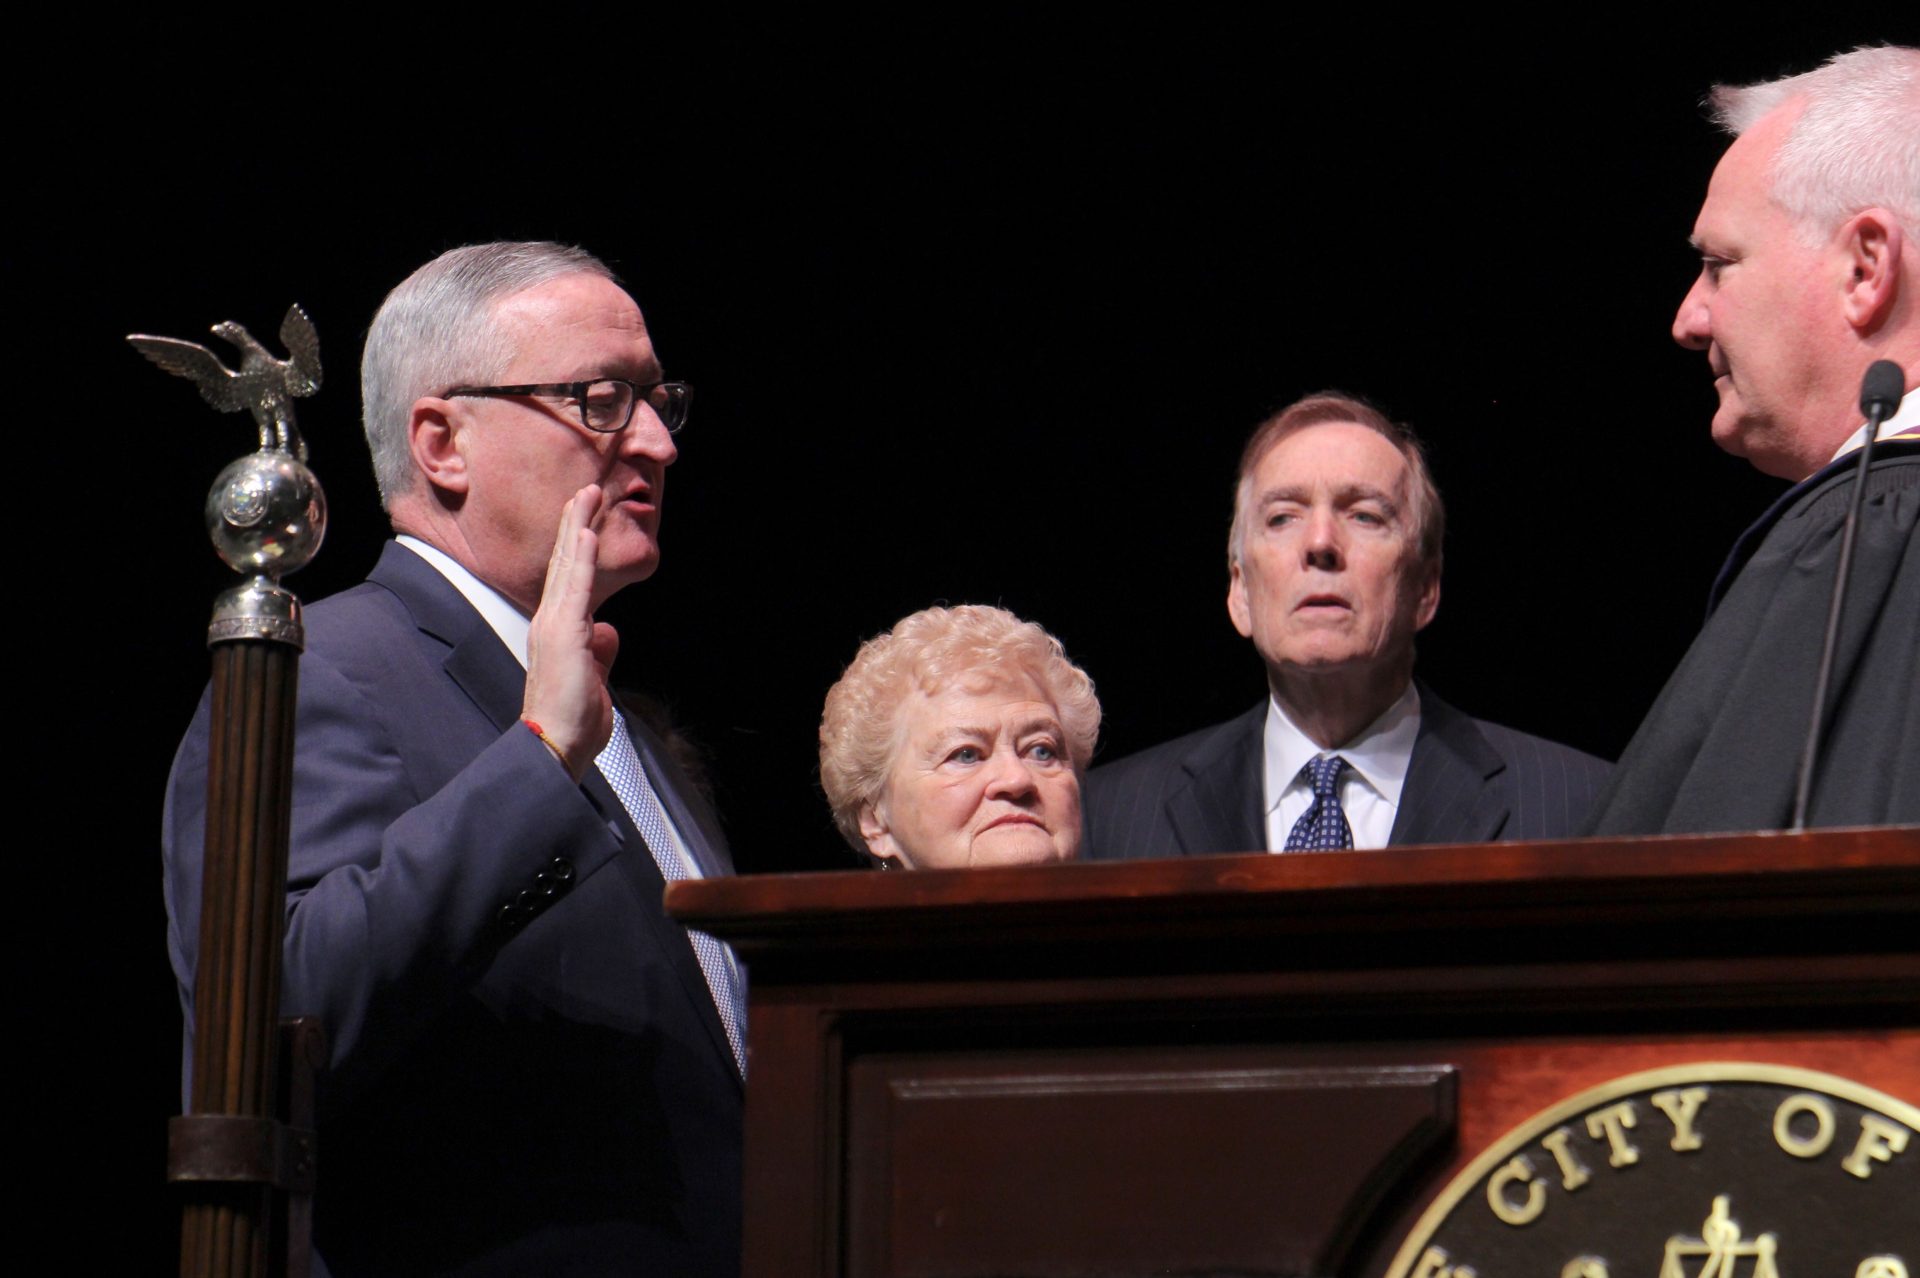 Mayor Jim Kenney is sworn in to his second term, flanked by his mother, Barbara.